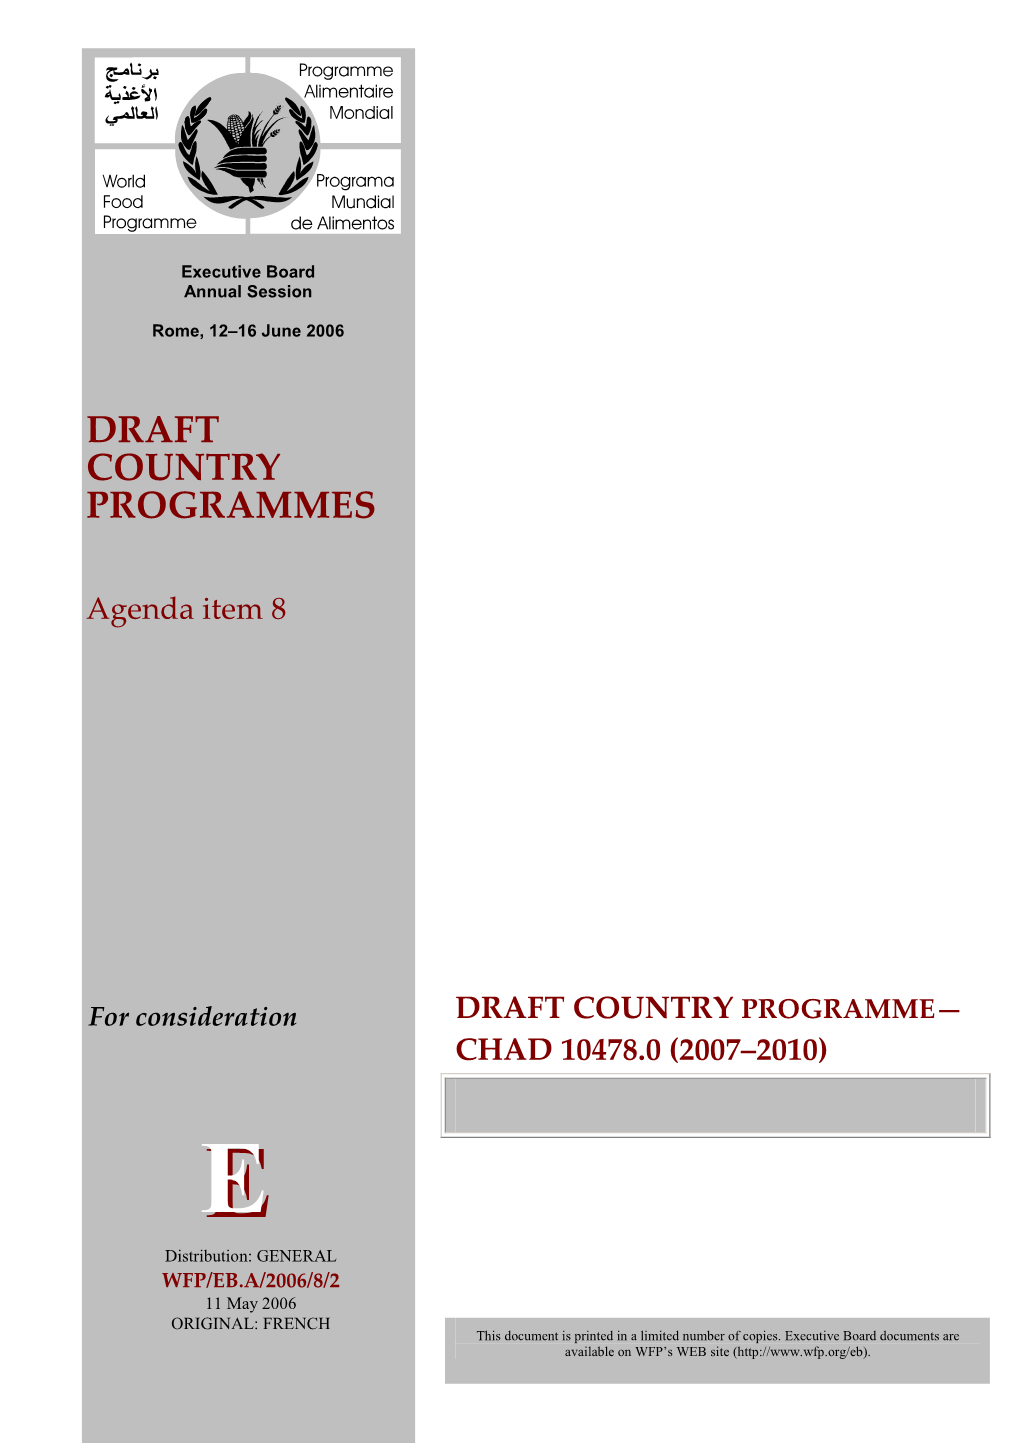 Draft Country Programme Chad 10478.0